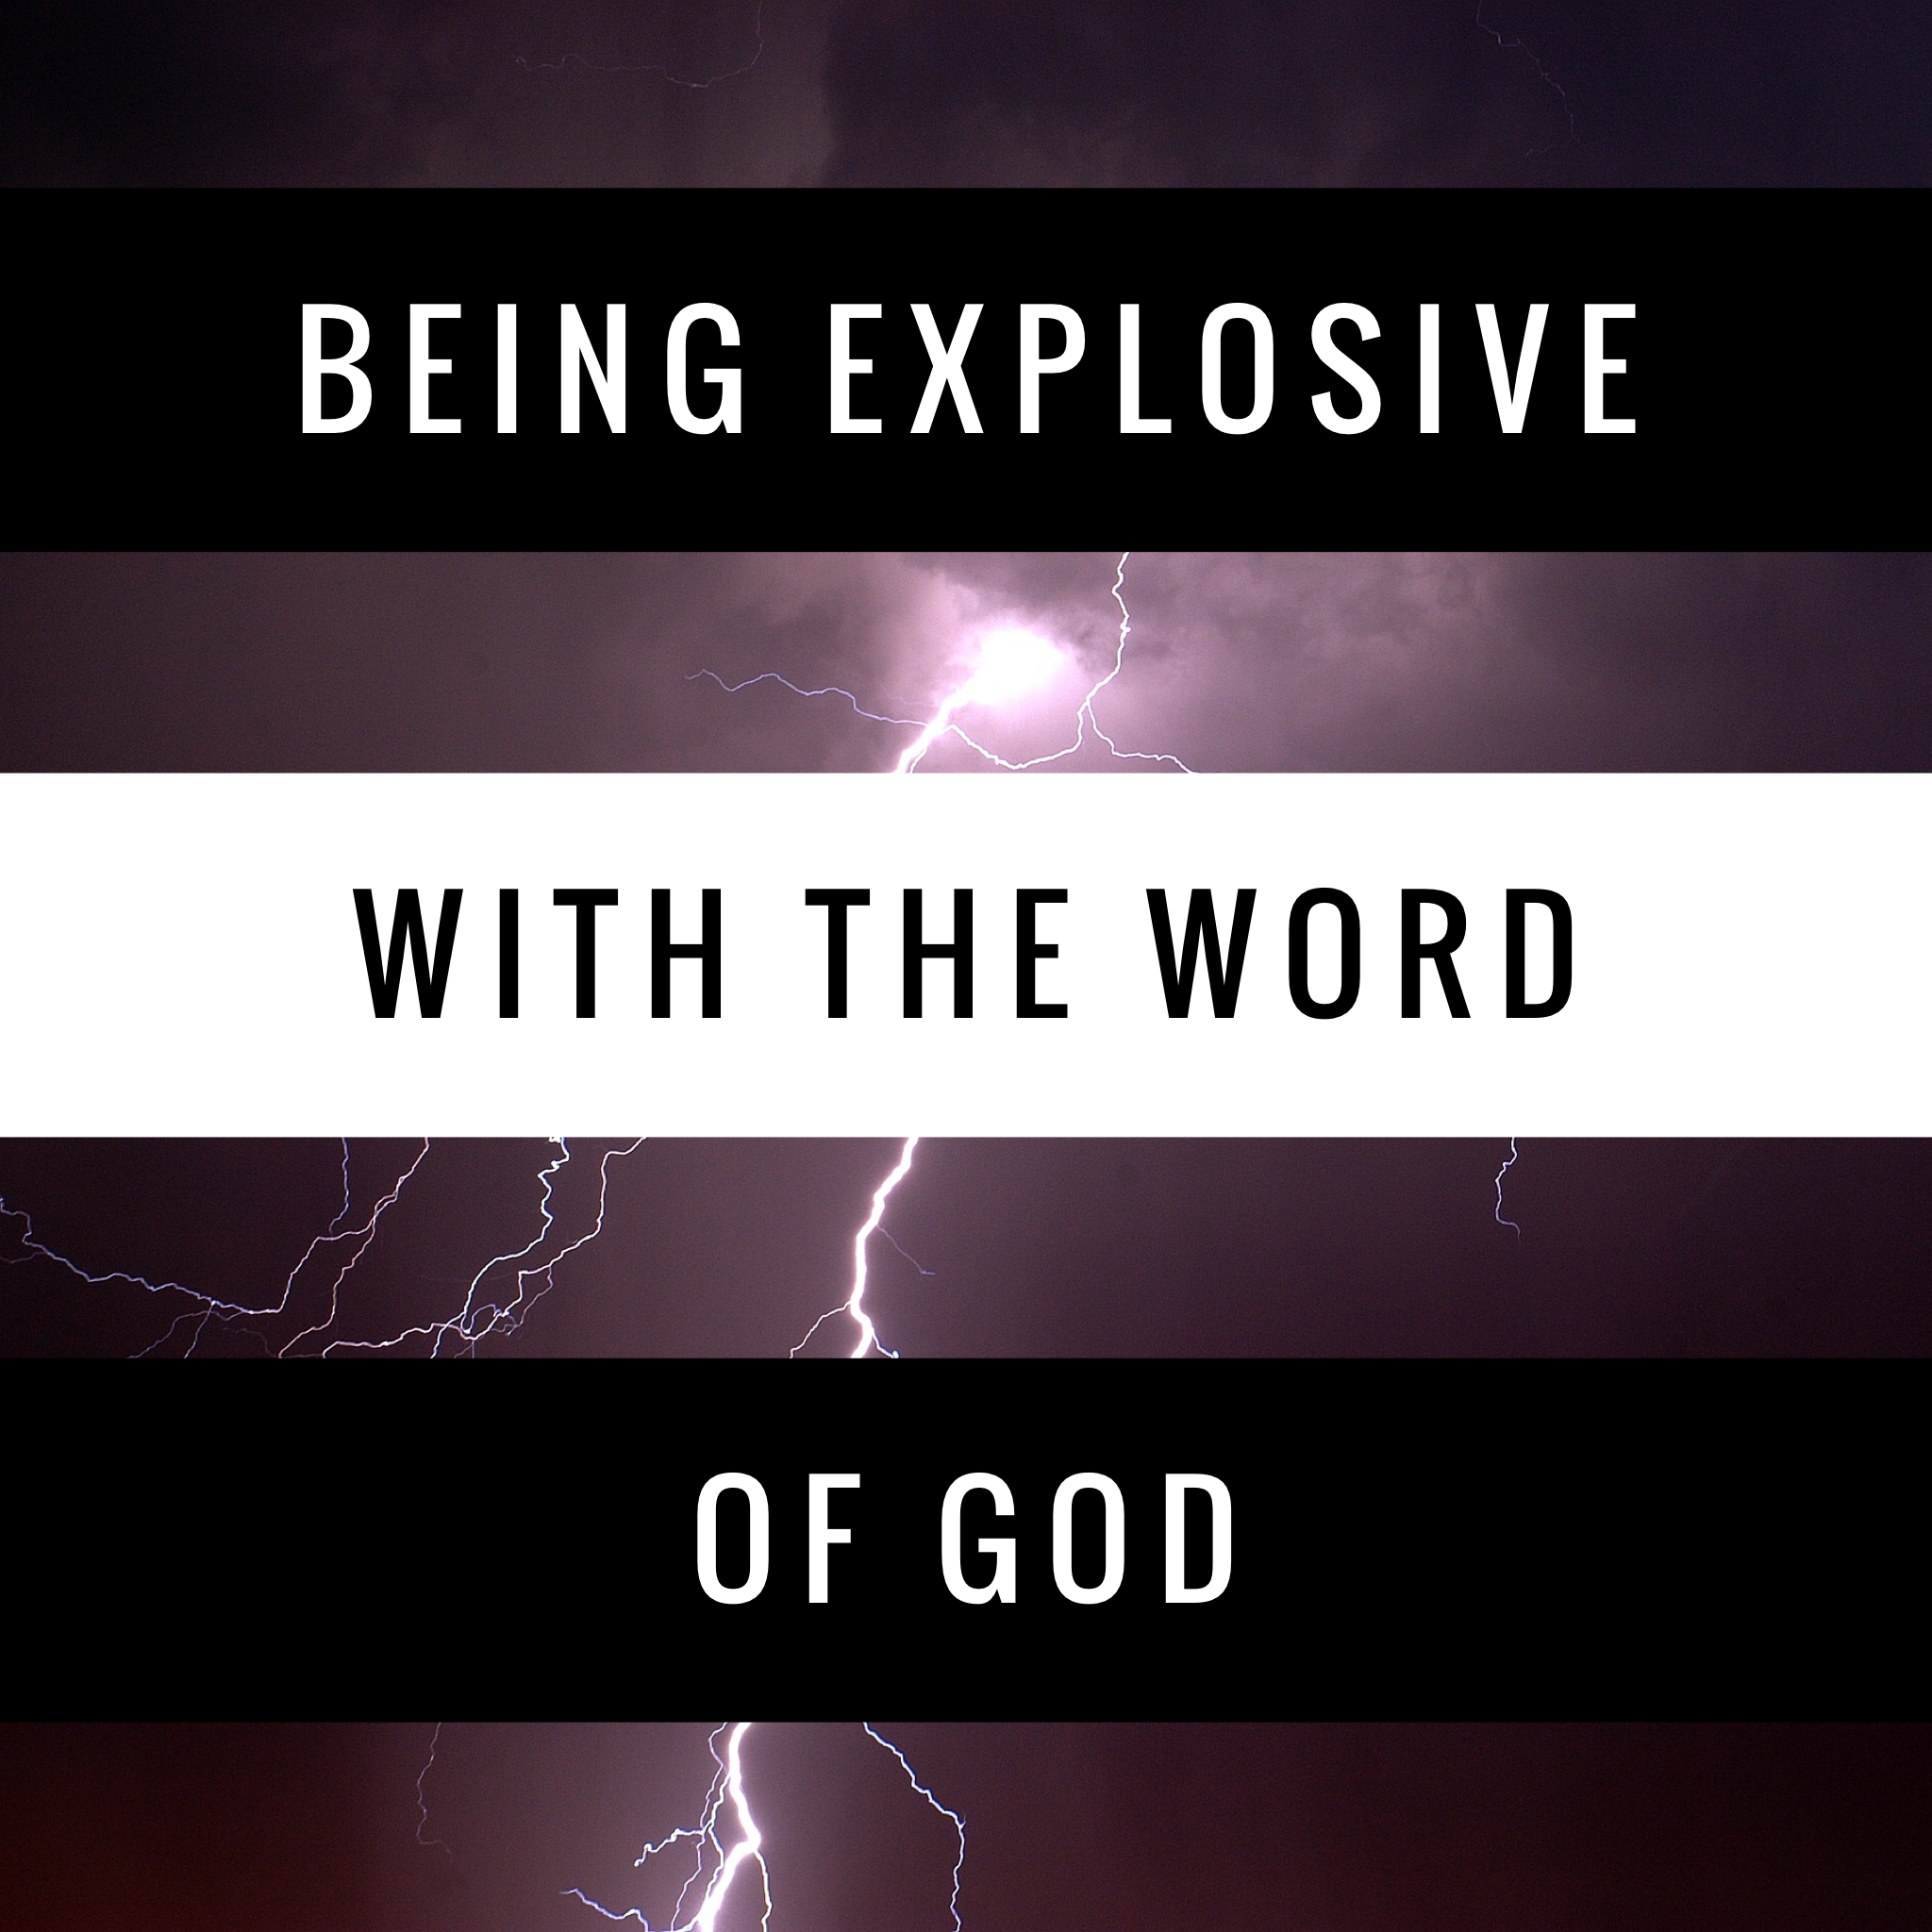 Being Explosive with the Word of God - 1/29/19